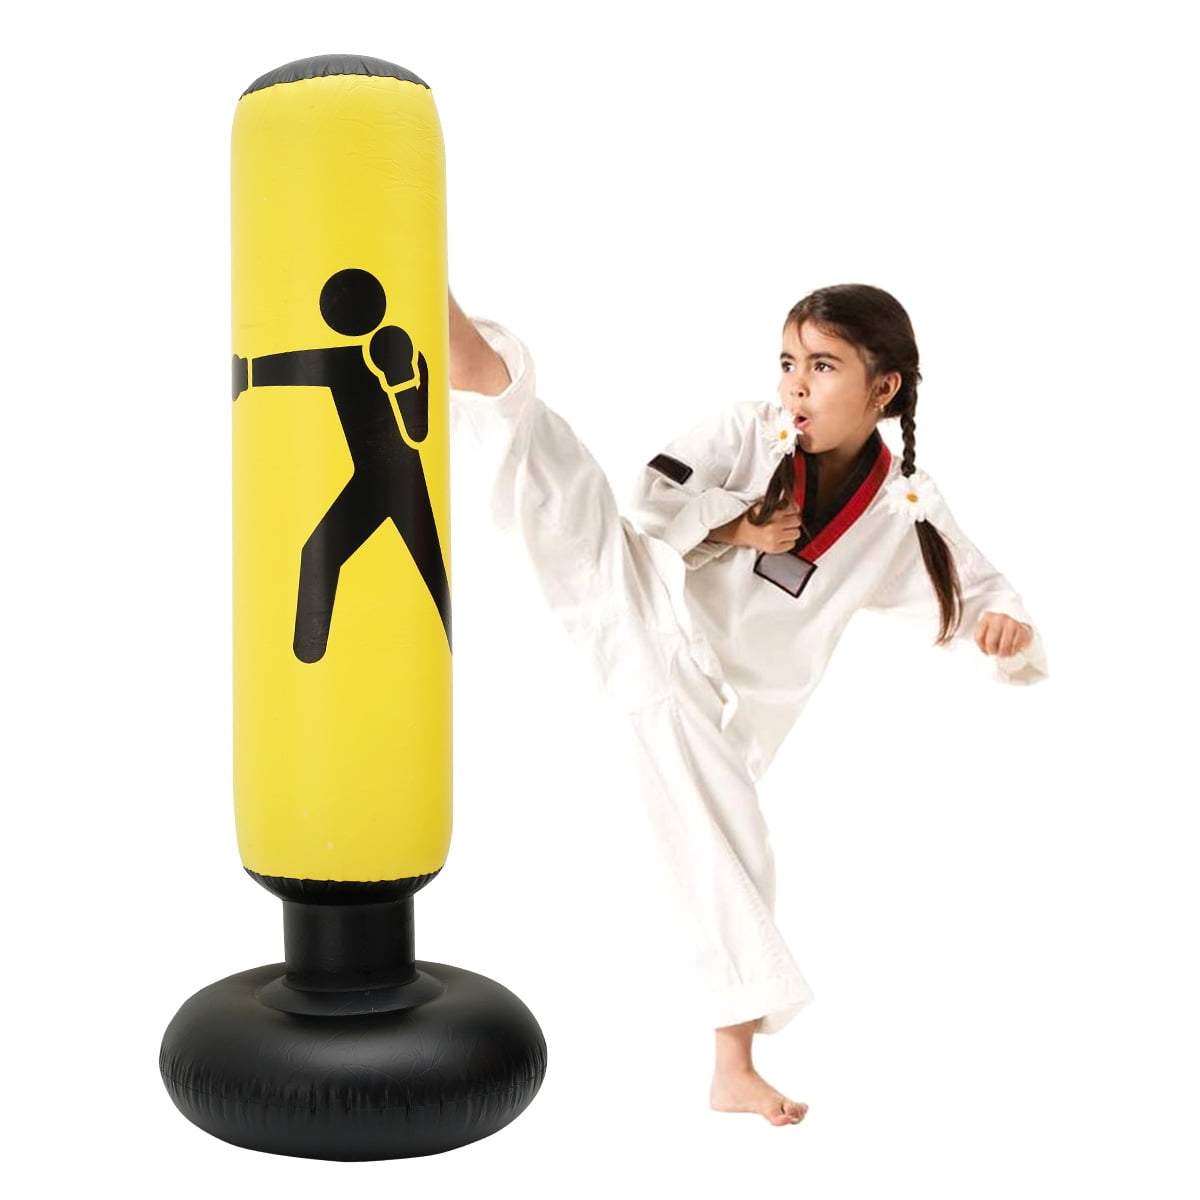 160cm Free Standing Inflatable Boxing Punch Bag Kick MMA Training Kids Adults US 